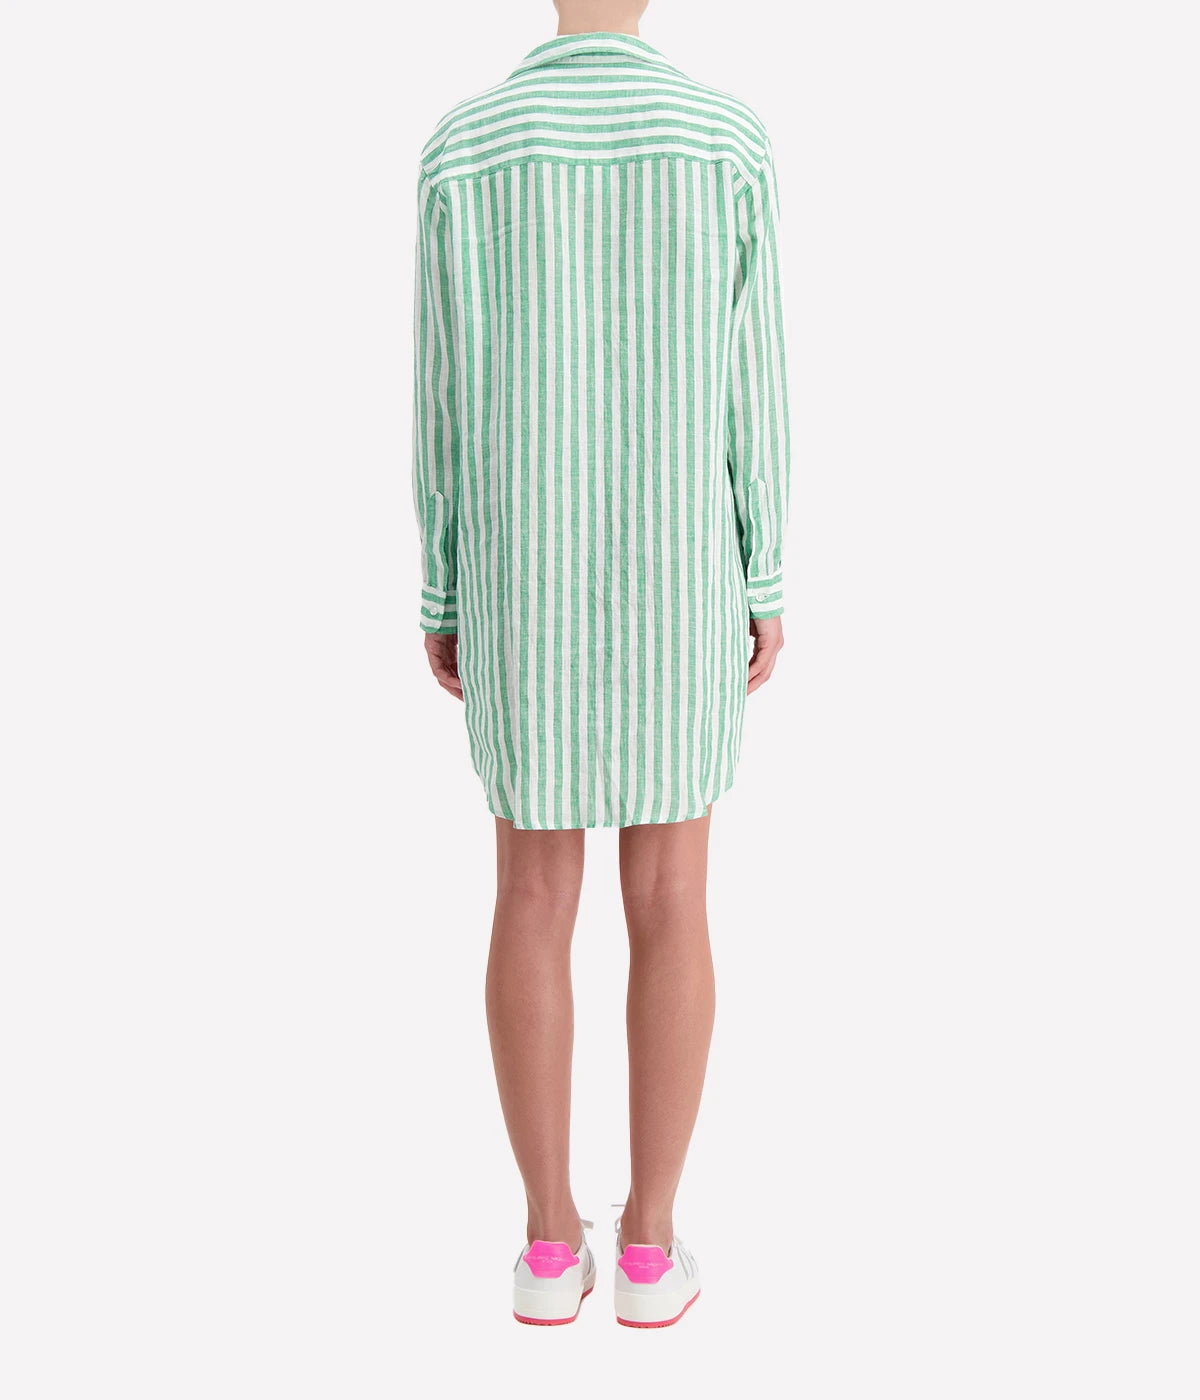 Mary Classic Shirtdress in Green Stripe Classic Linen